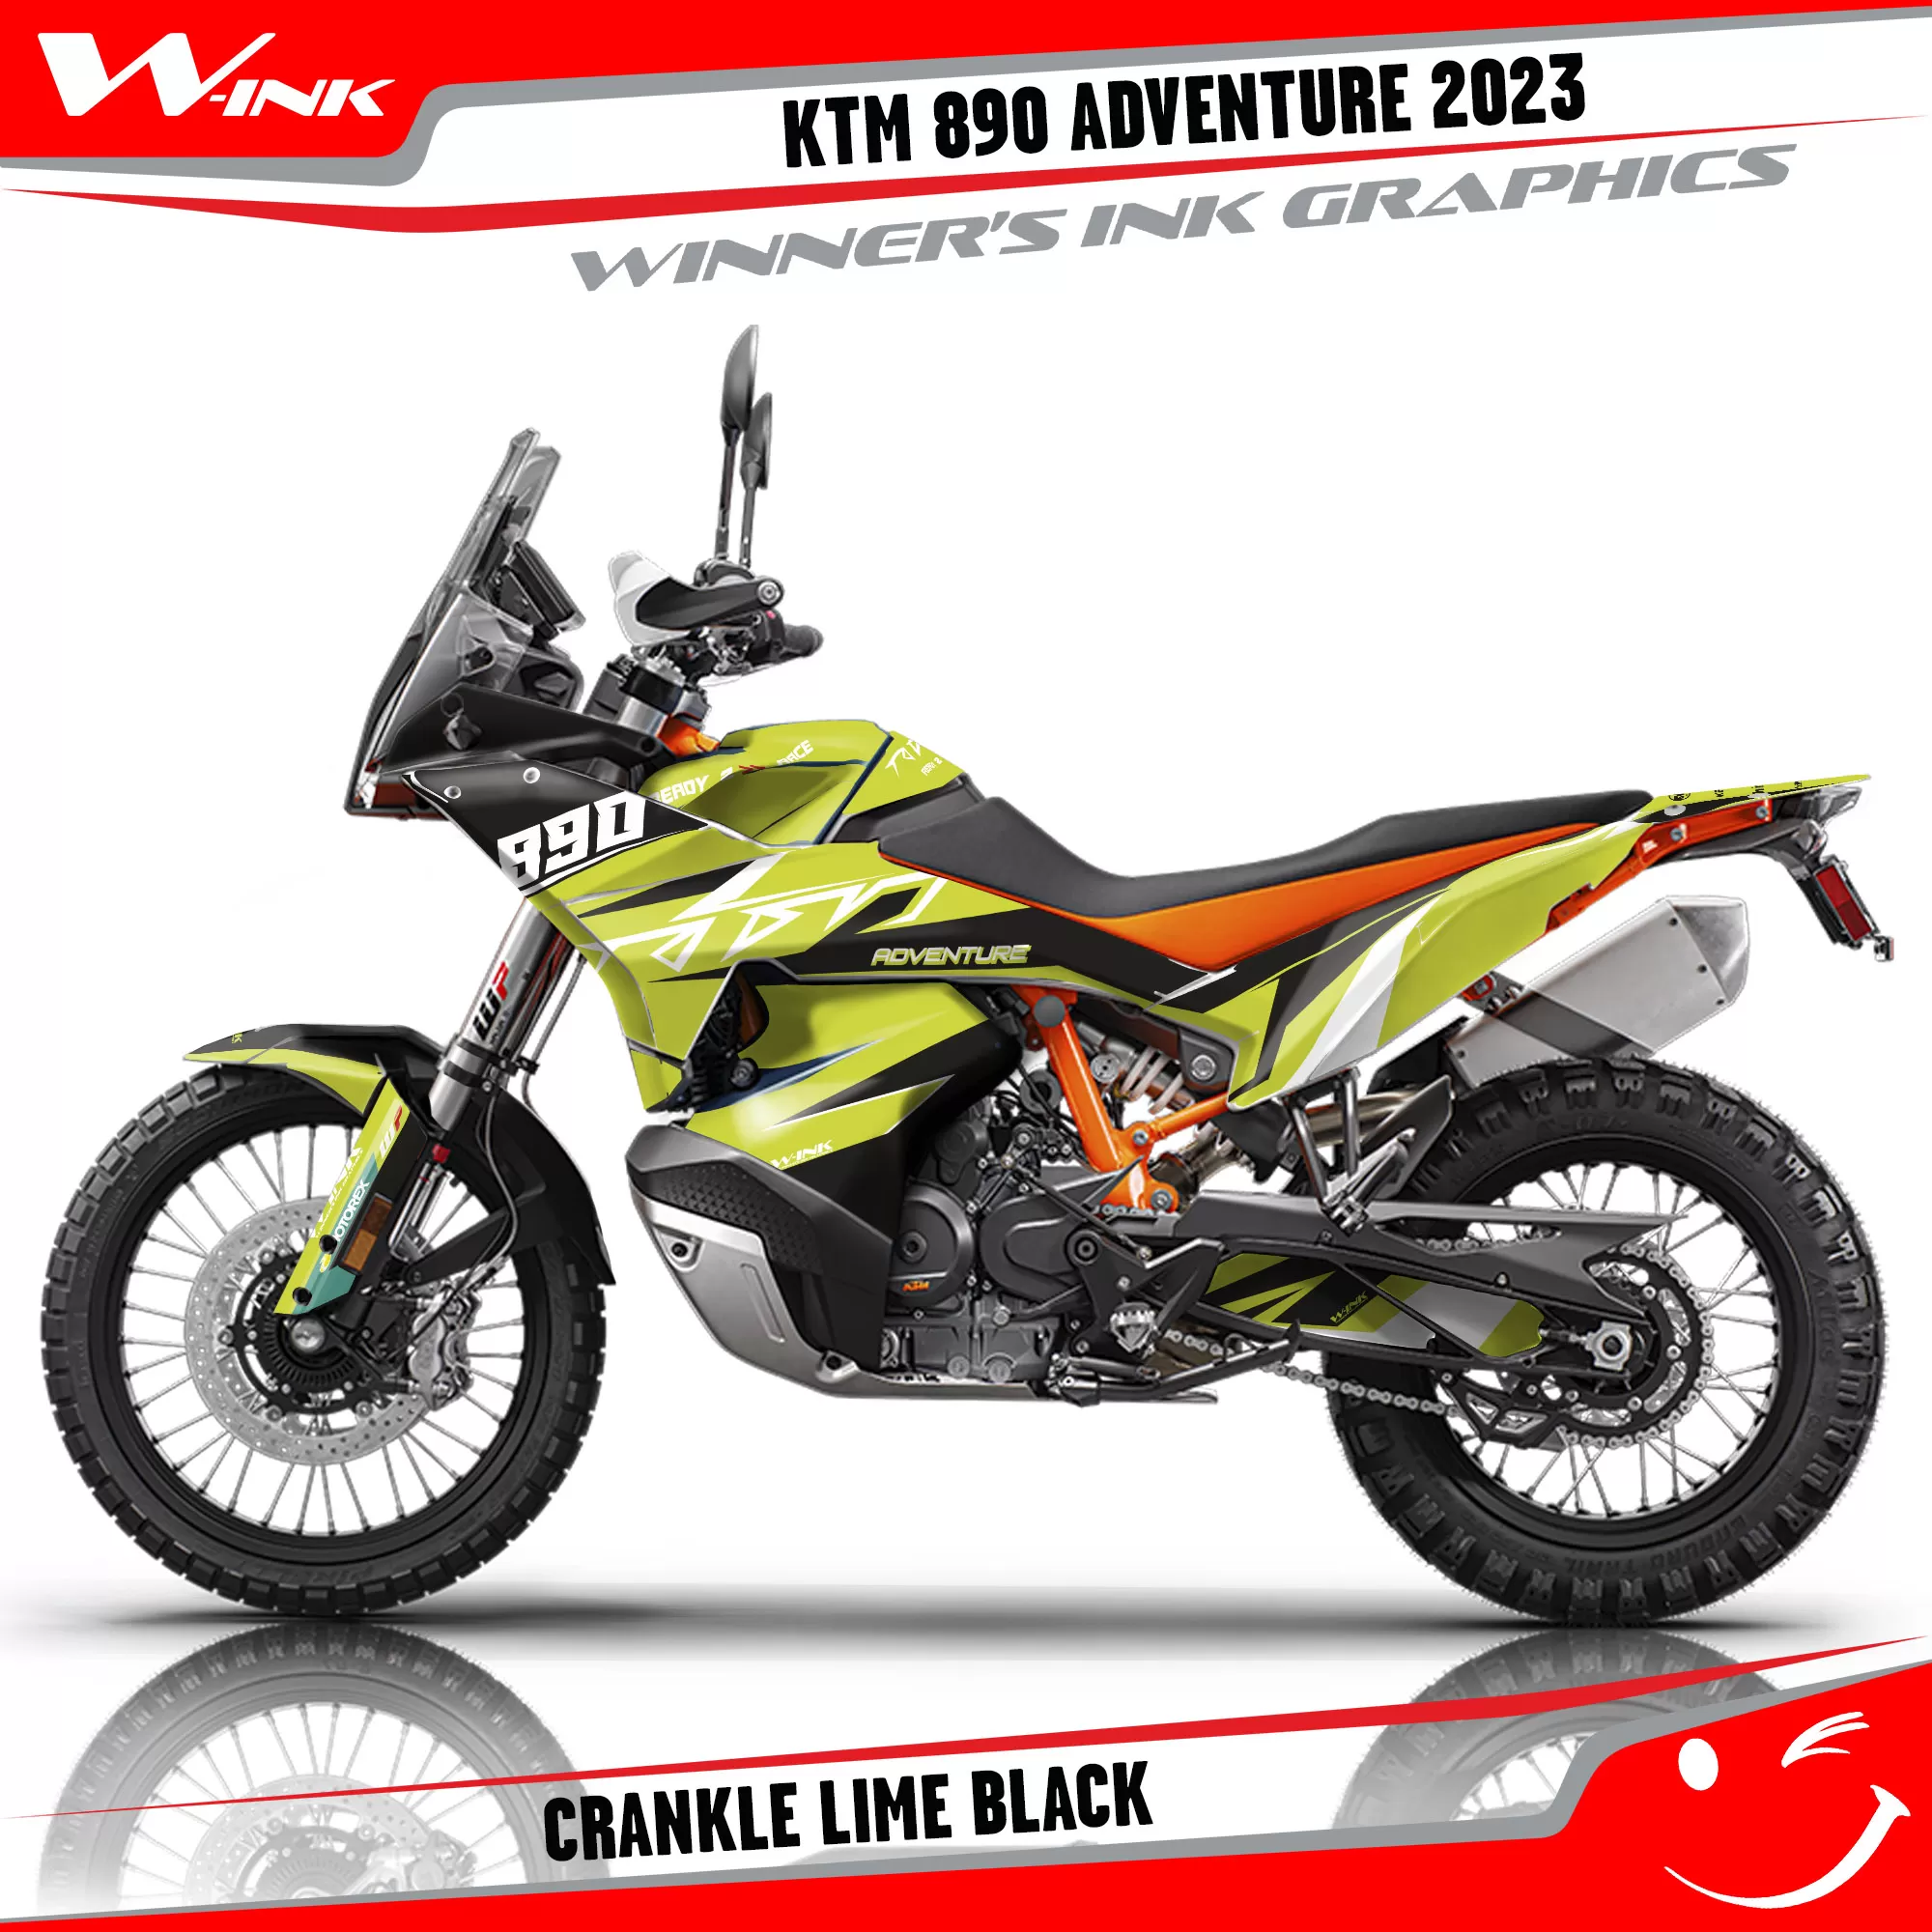 Adventure-890-2023-graphics-kit-and-decals-with-design-Crankle-Lime-Black